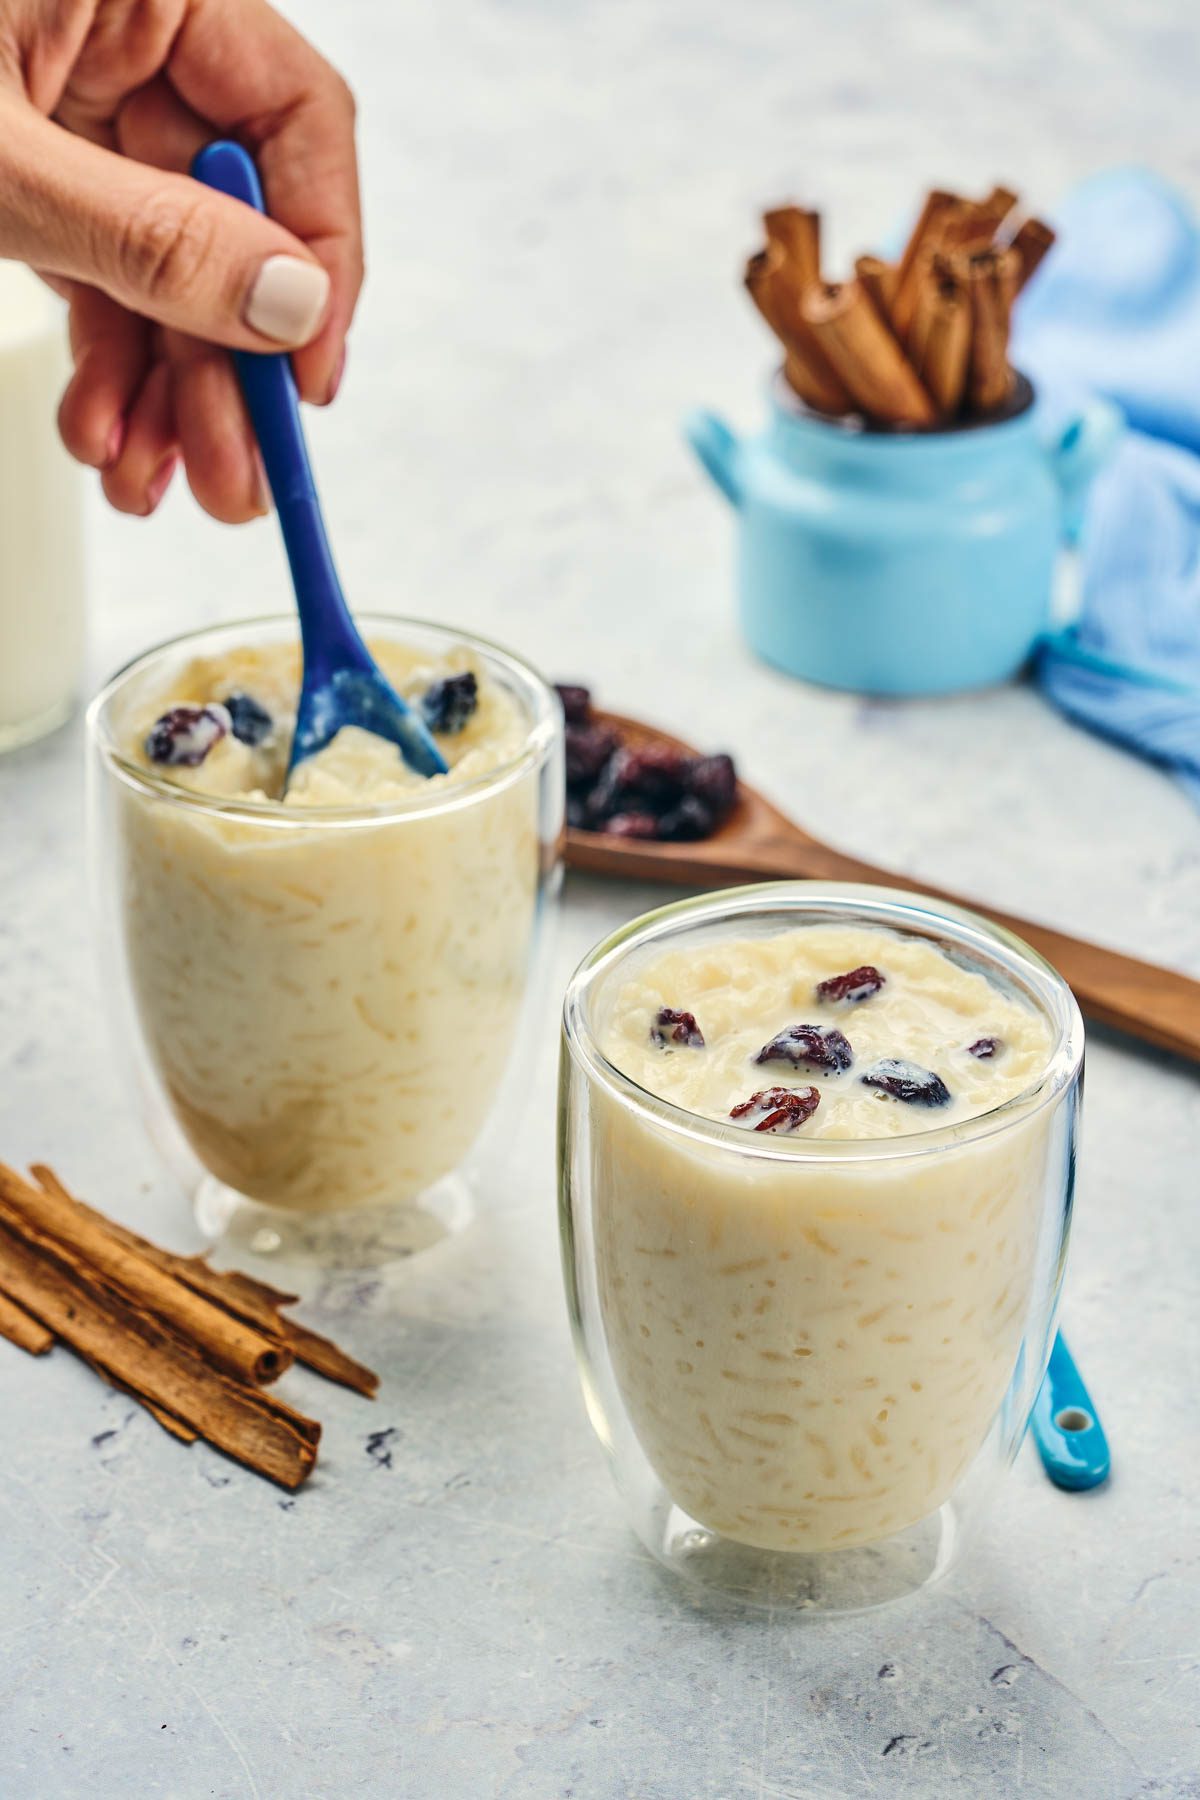 Arroz con leche in cups with blue spoons and cinnamon sticks